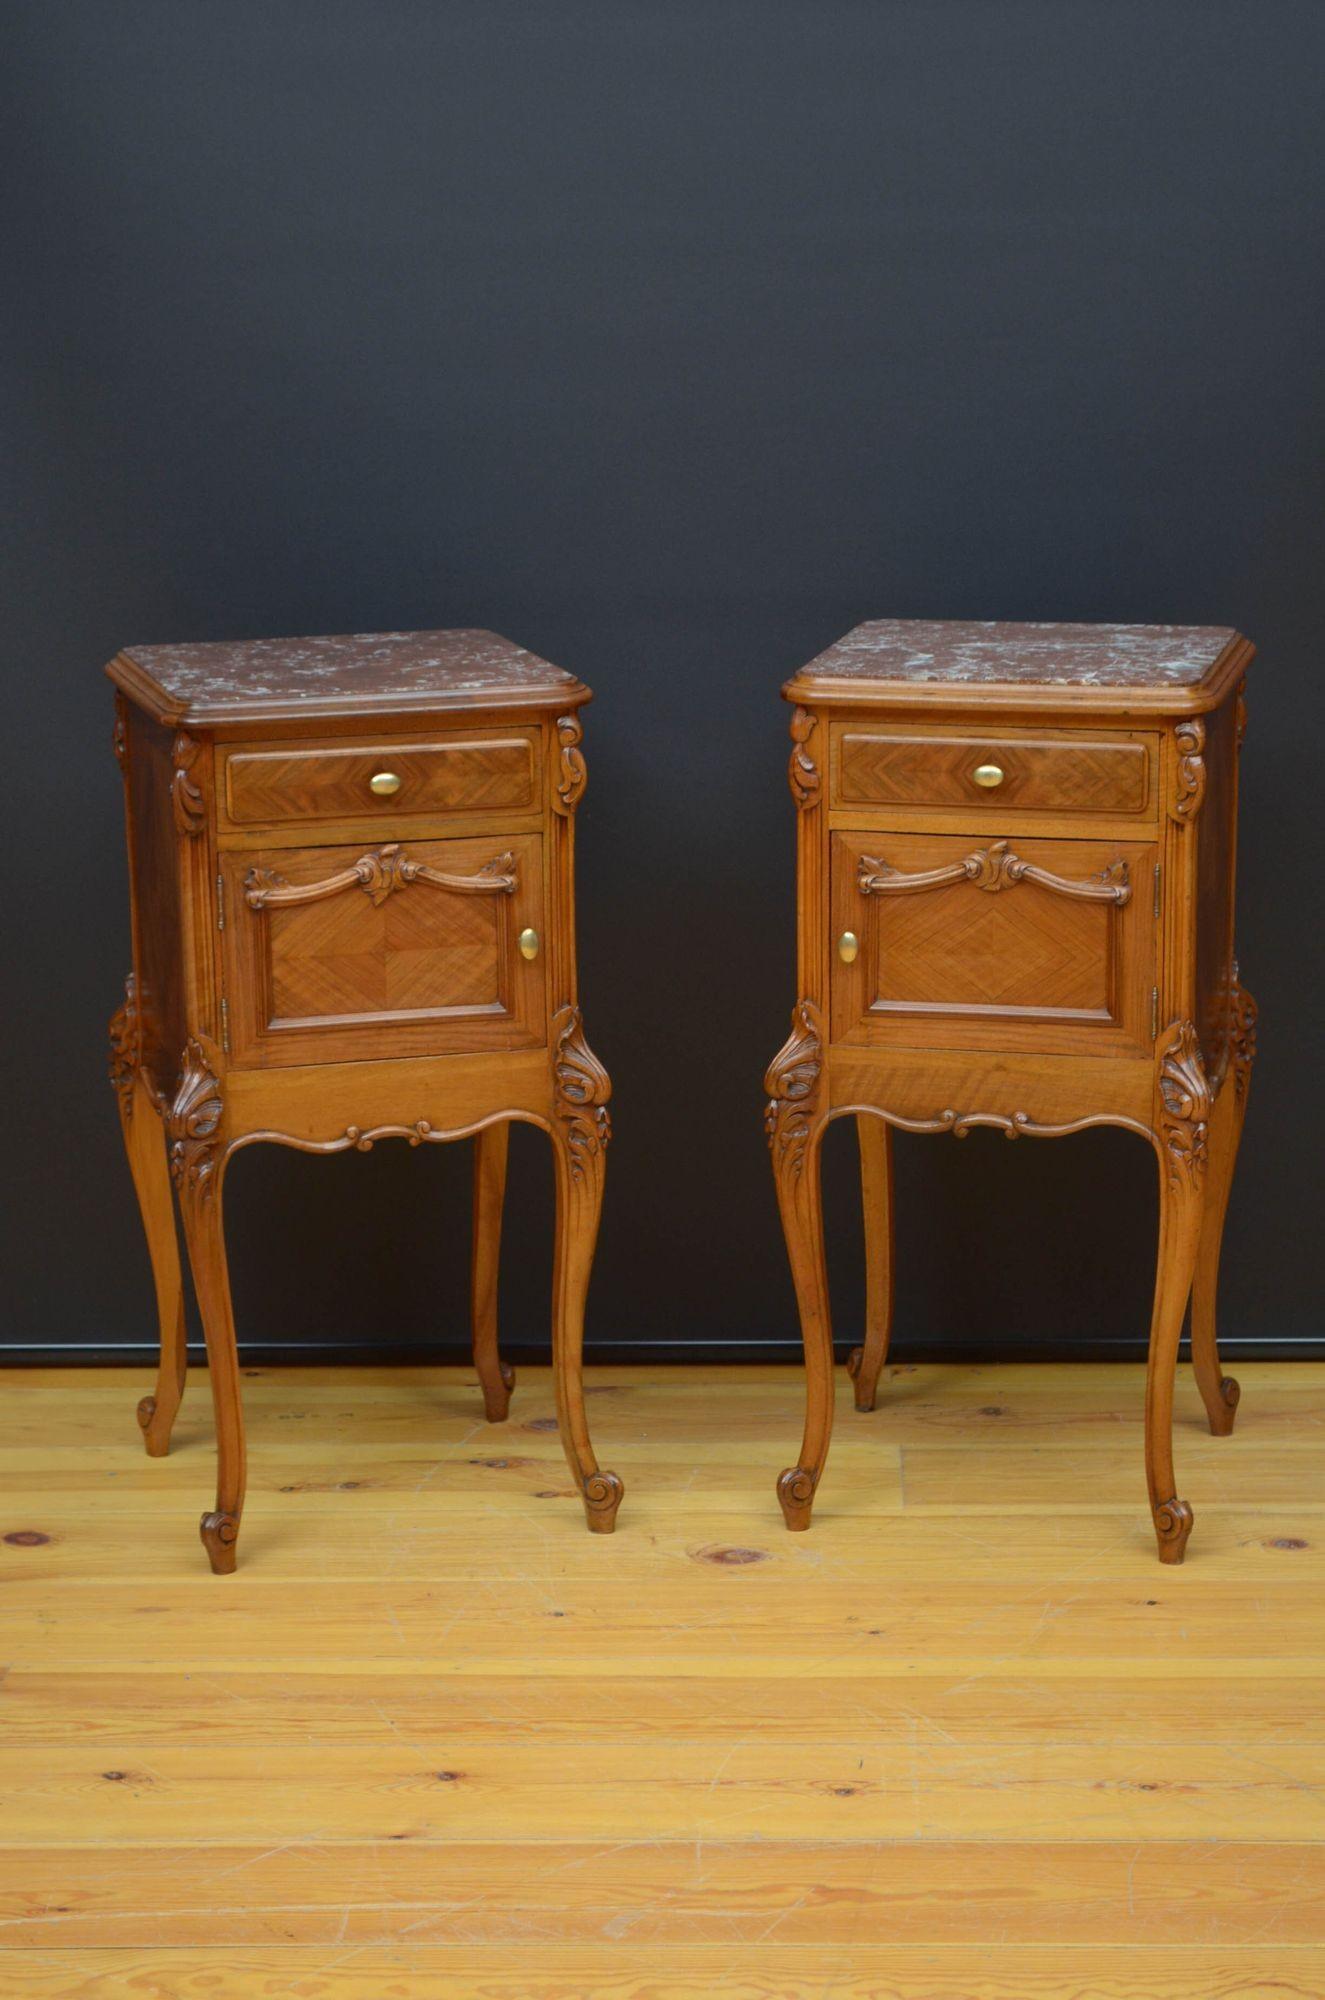 Pair of Bedside Cabinets in Walnut In Good Condition For Sale In Whaley Bridge, GB